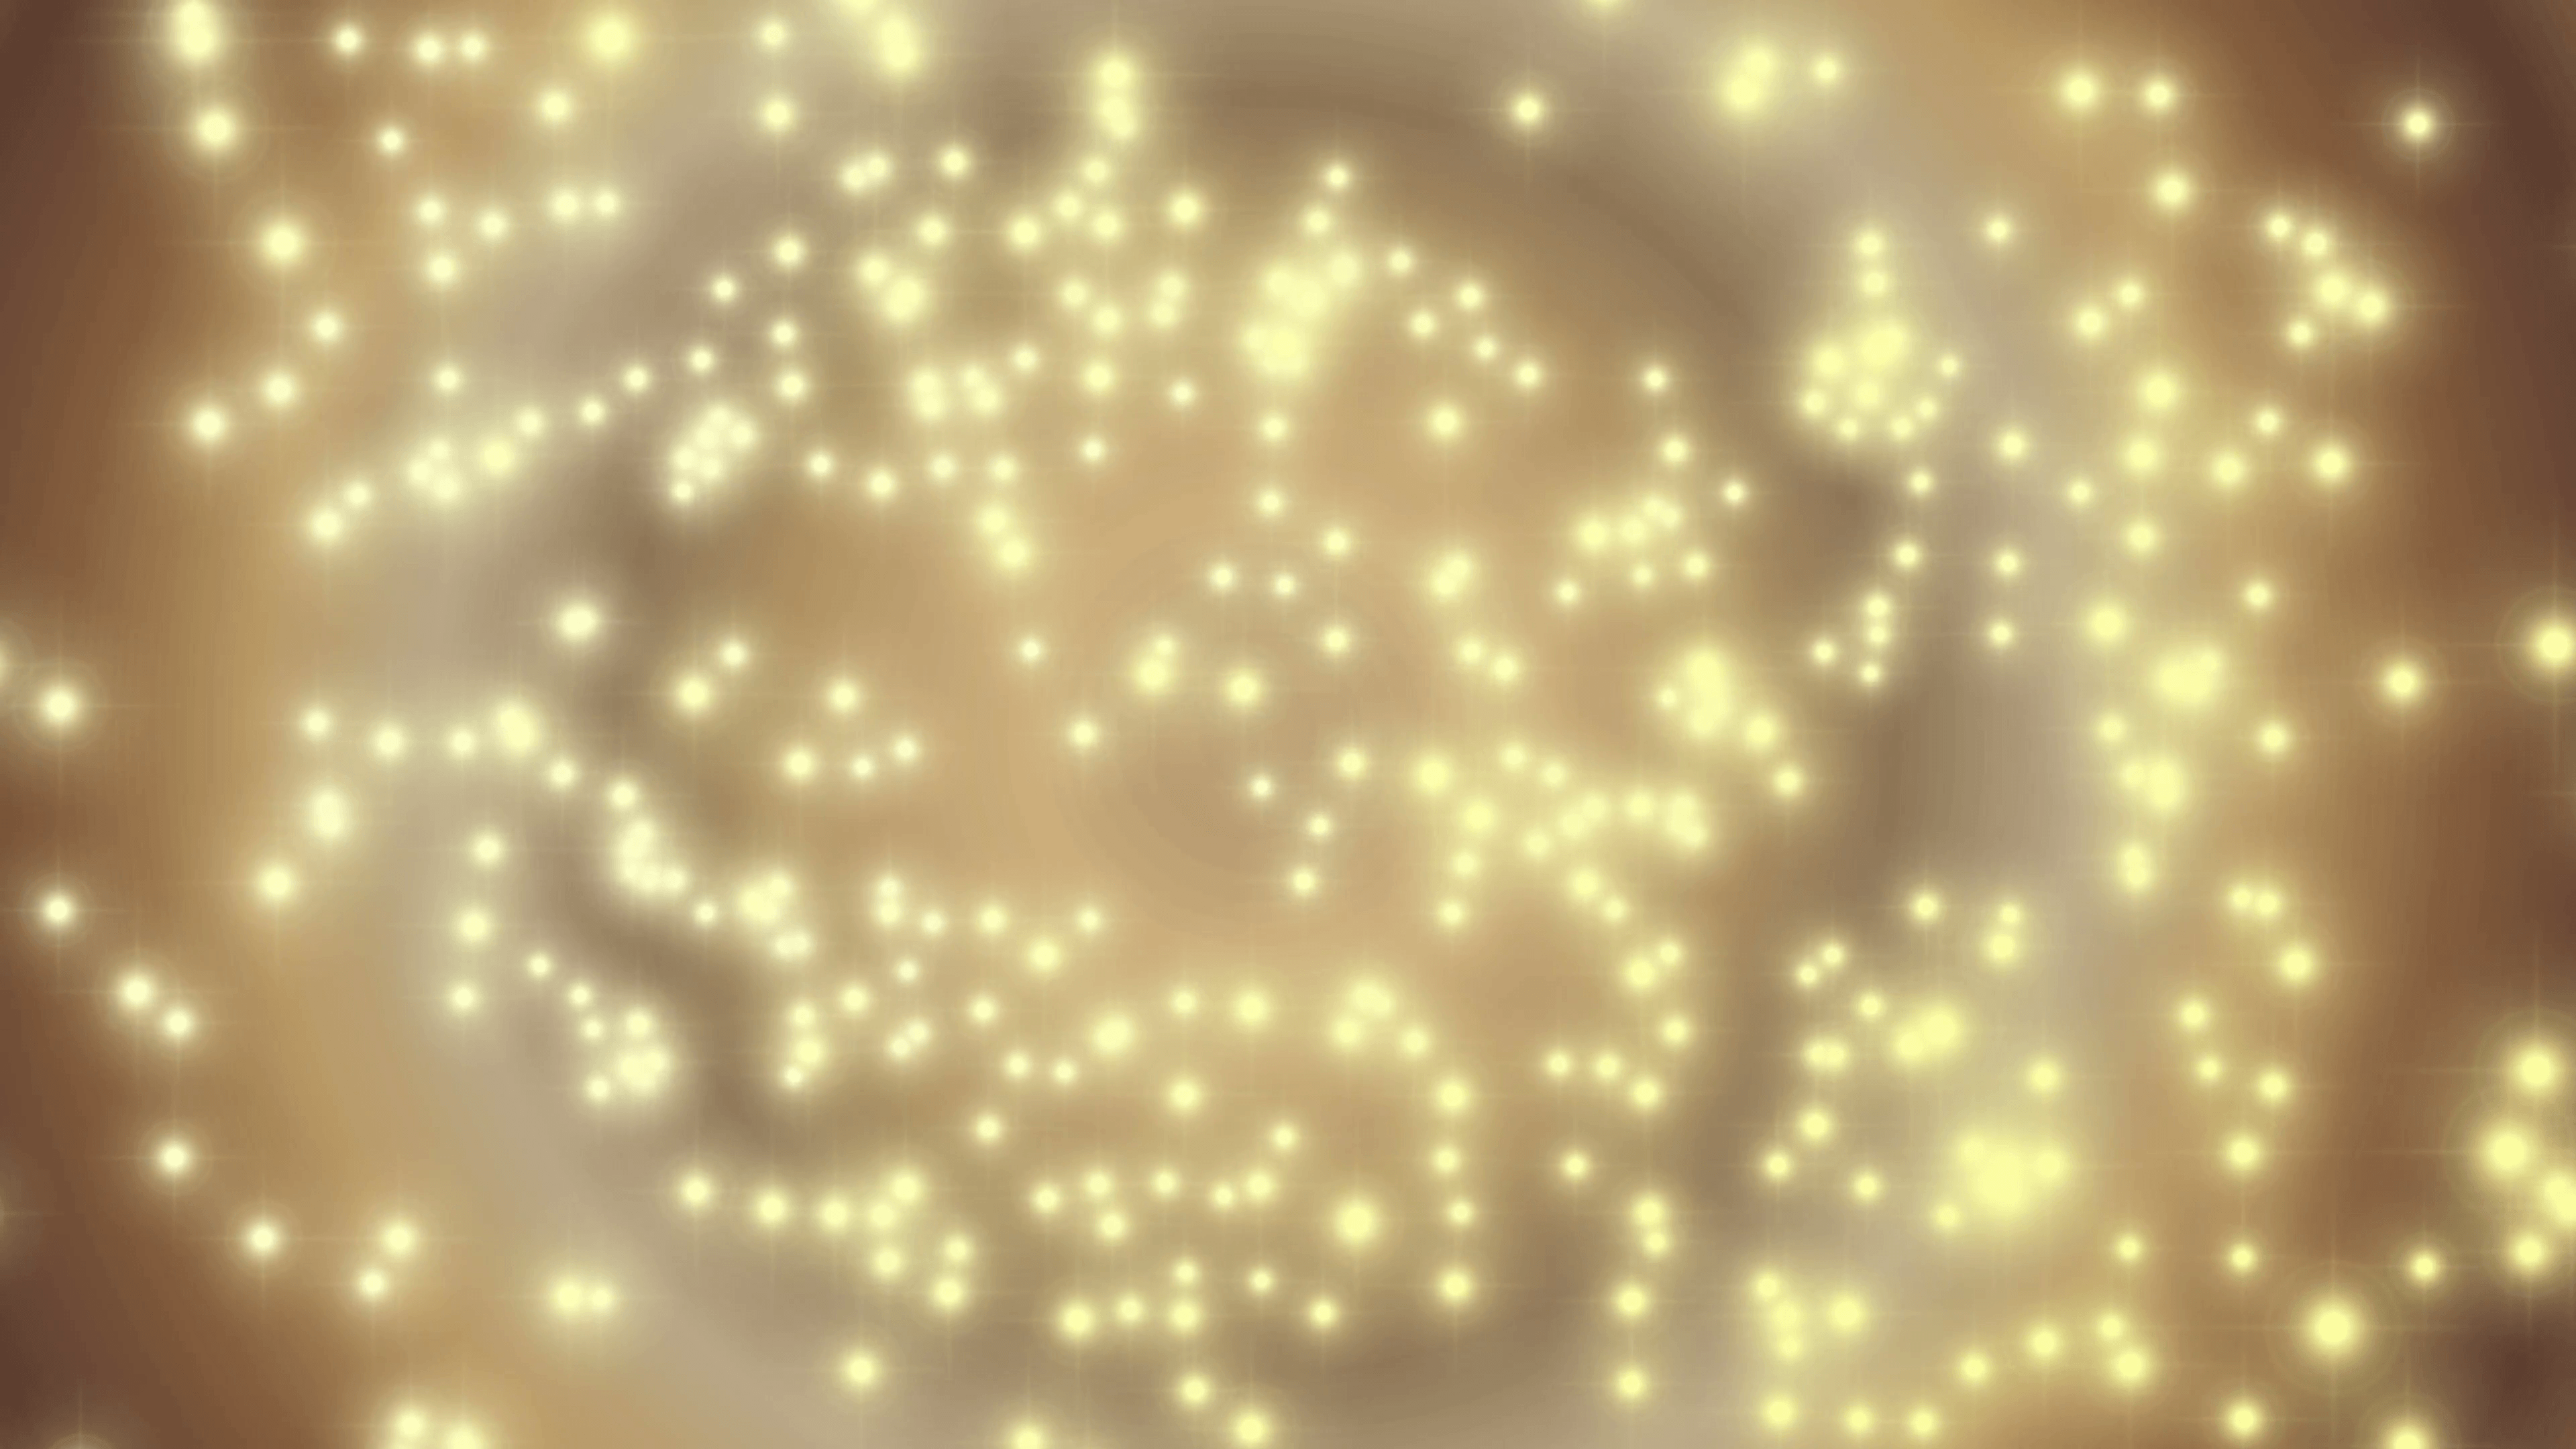 Shiny gold particles background animation Motion Background